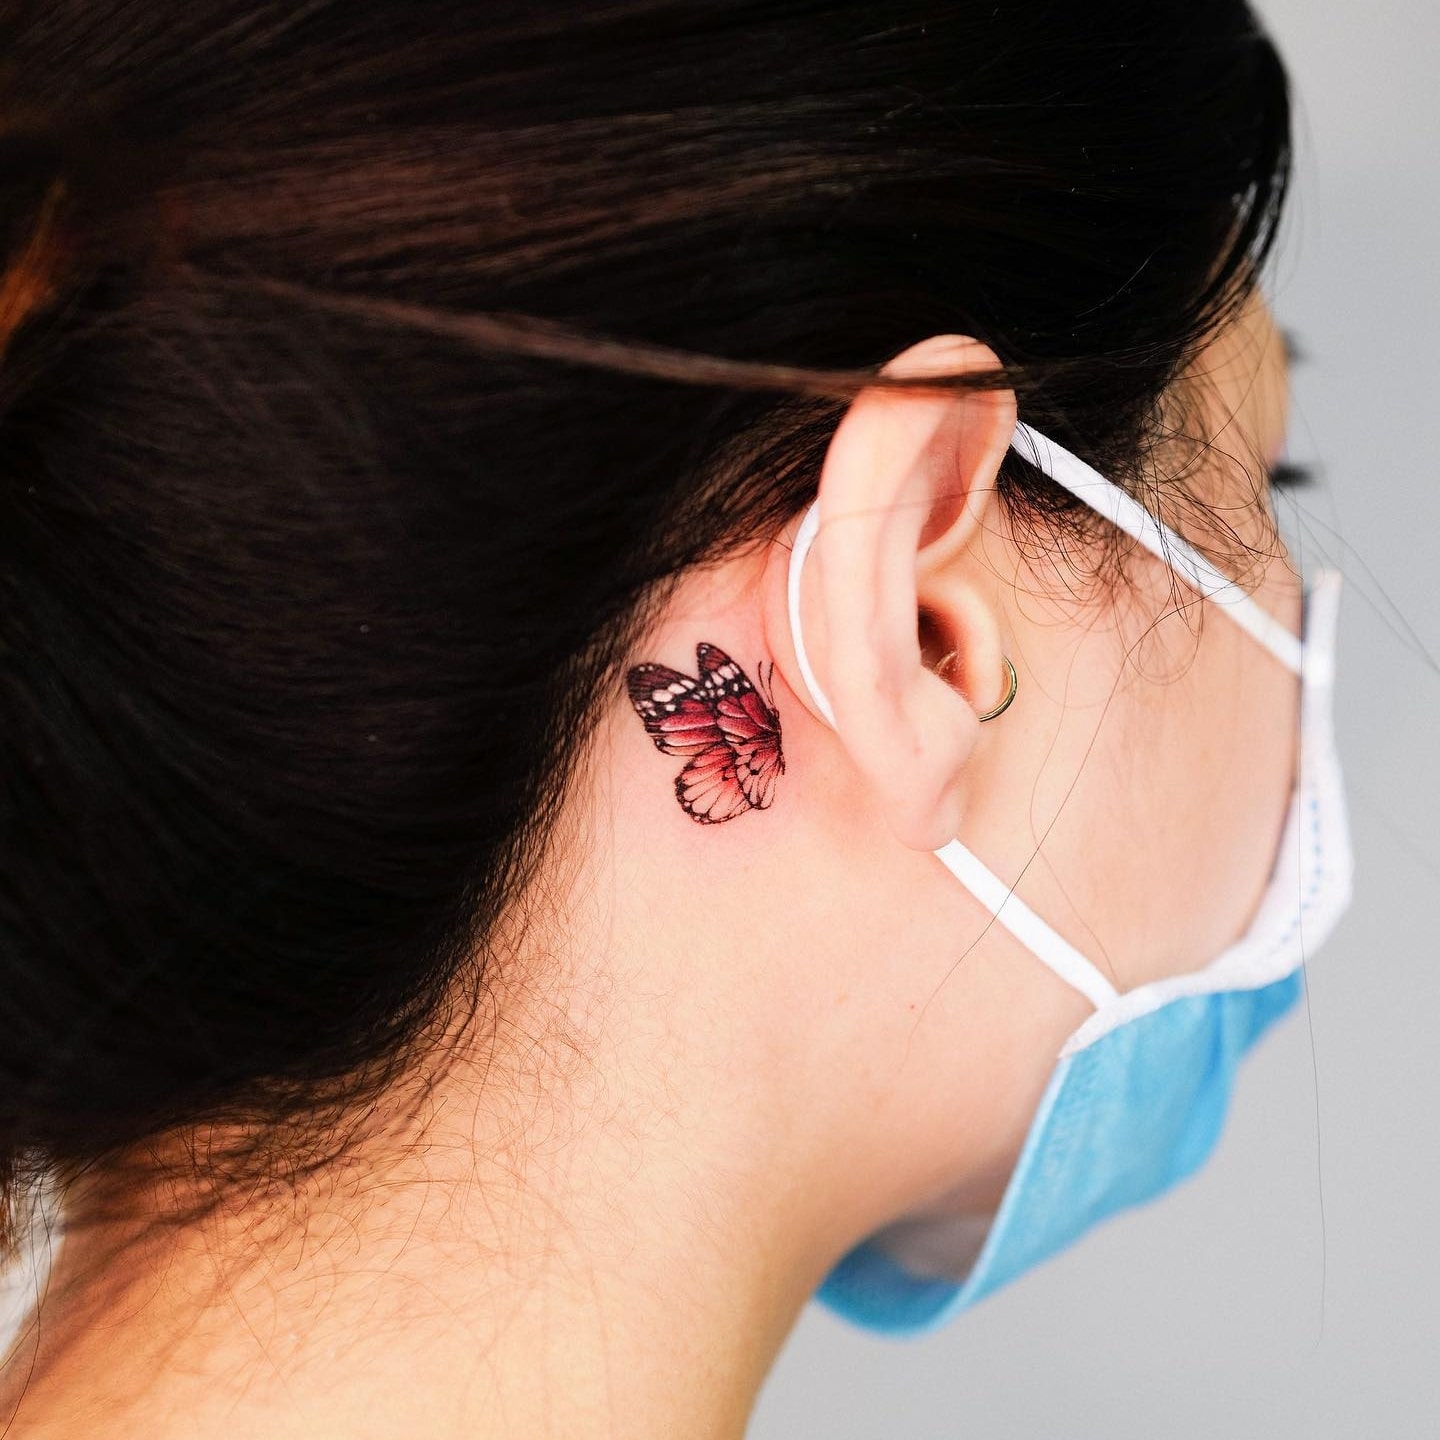 Red admiral tattoo behind ear